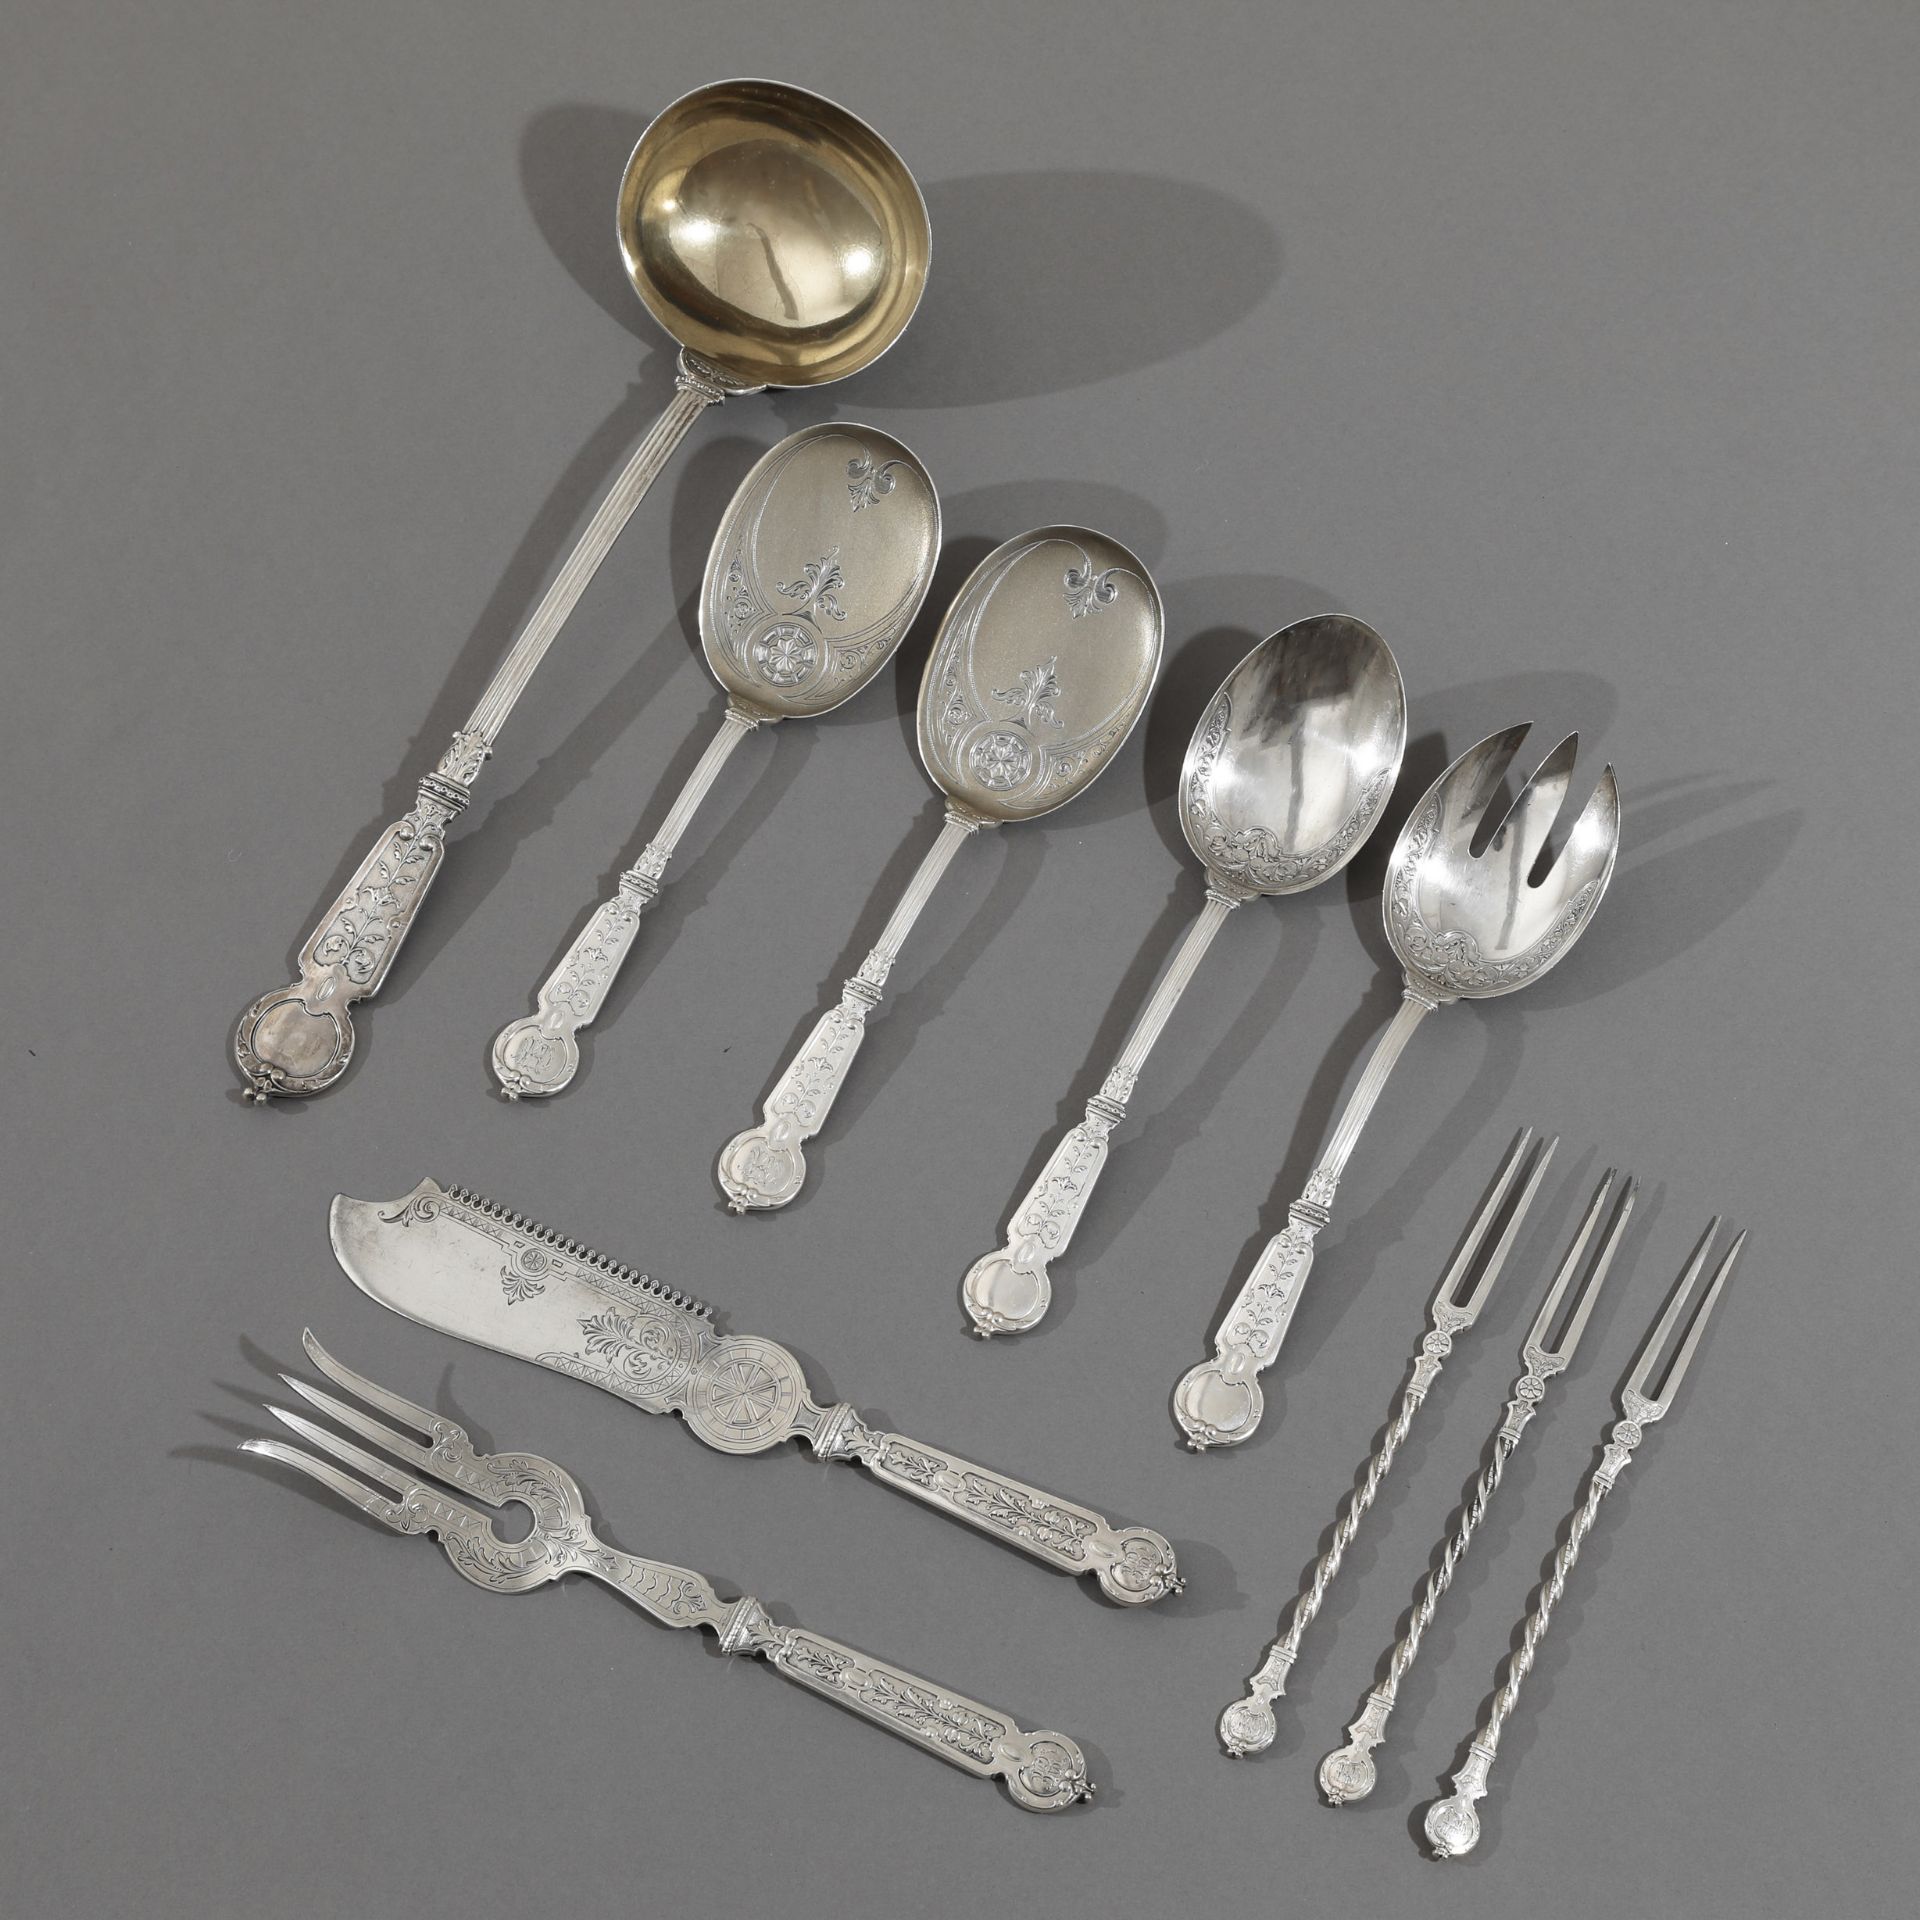 G. Hermeling for Wilkens Söhne, Bremen, 118-piece cutlery set with serving pieces - Image 8 of 11